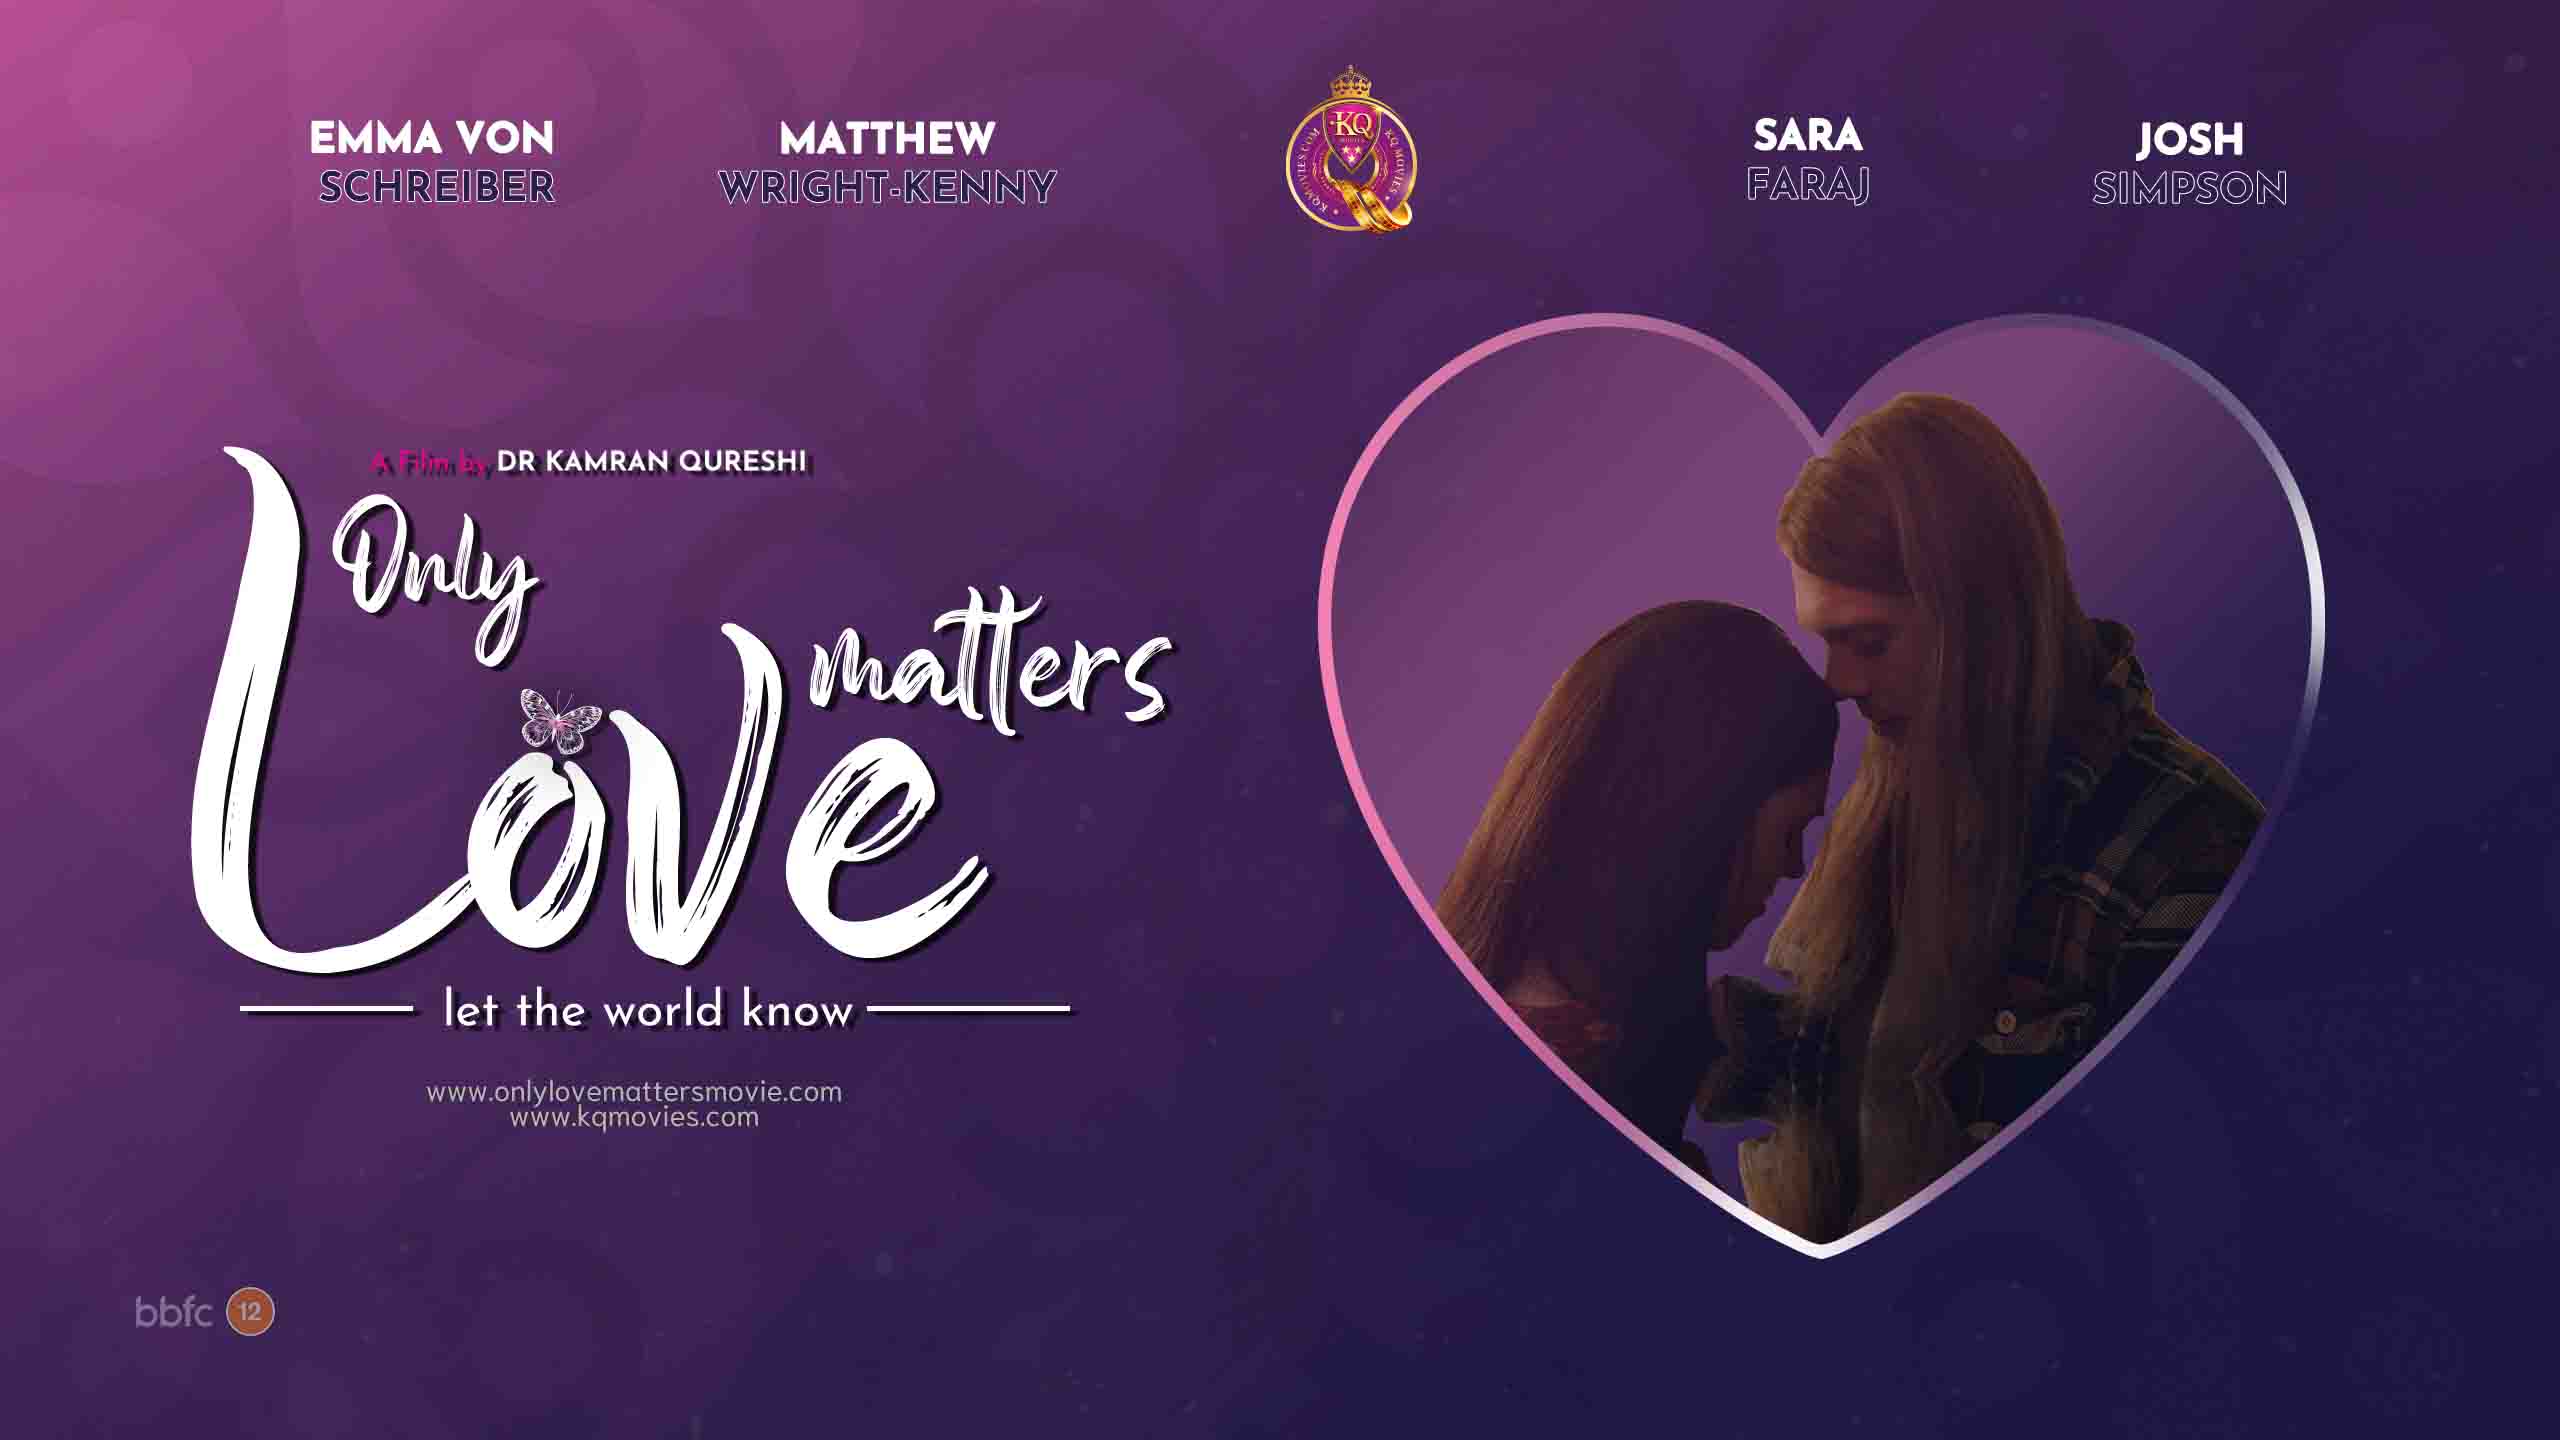 ONLY LOVE MATTERS